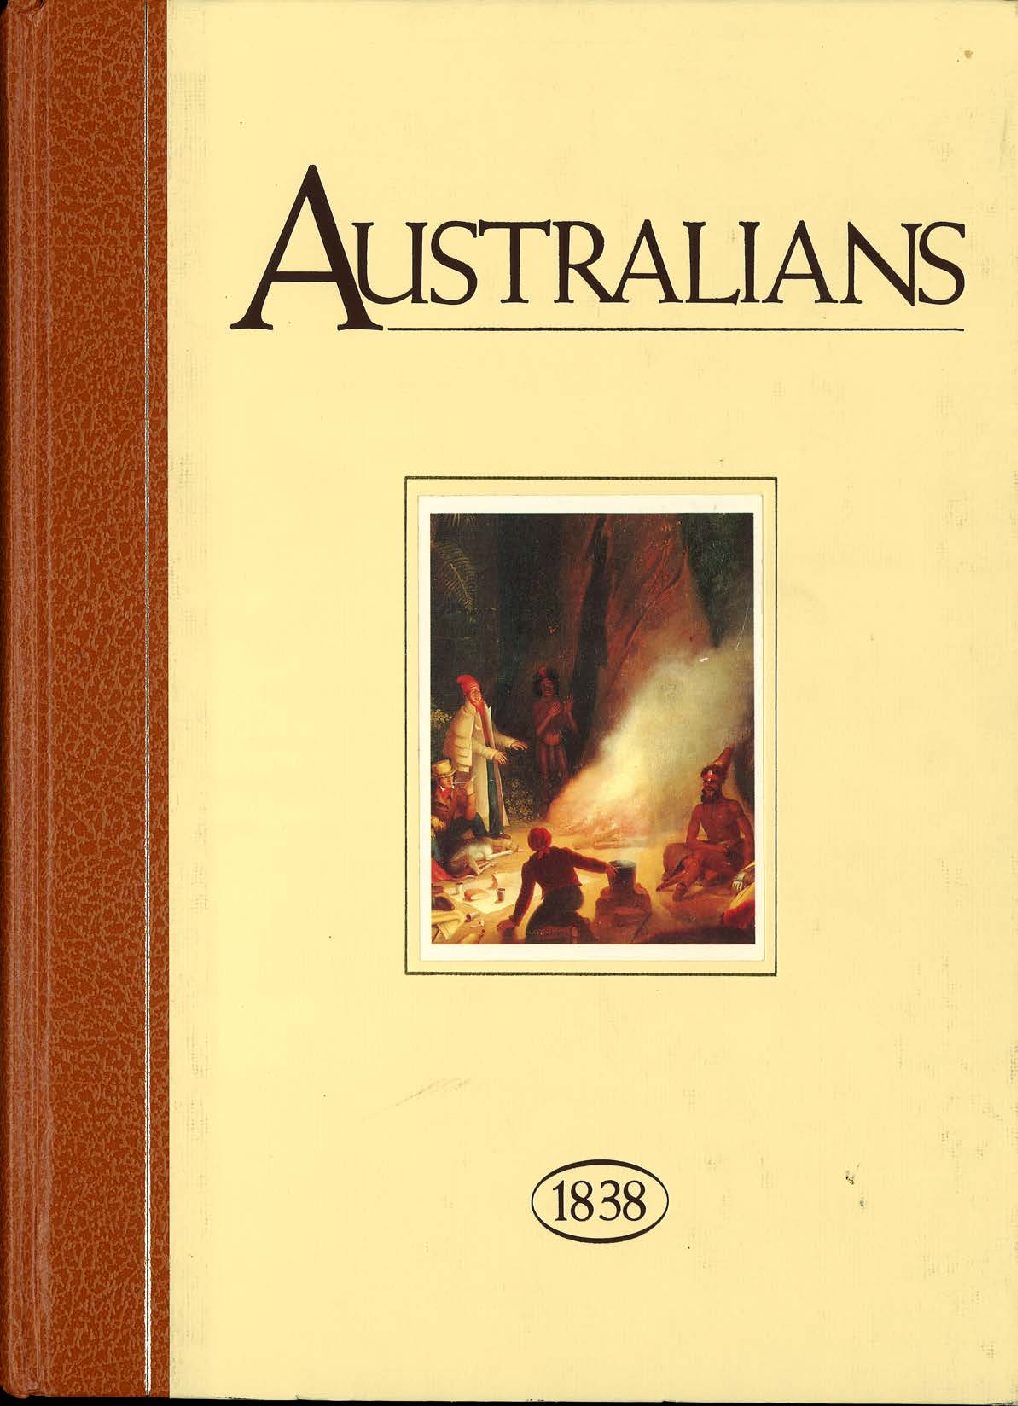 Australians 1838 Chapter 1 – Past and Present